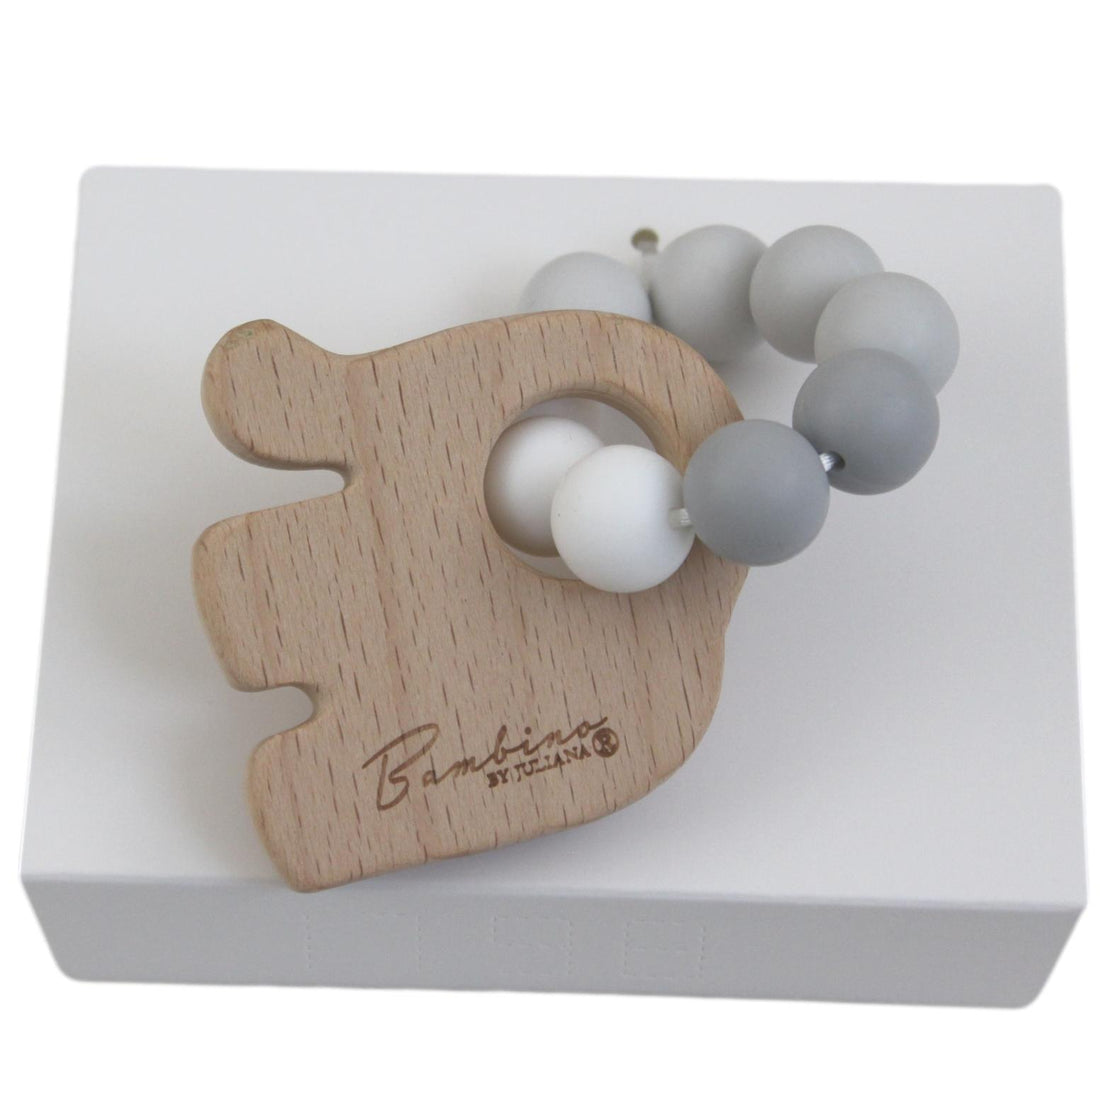 Unisex Baby Silicone Teether Toy